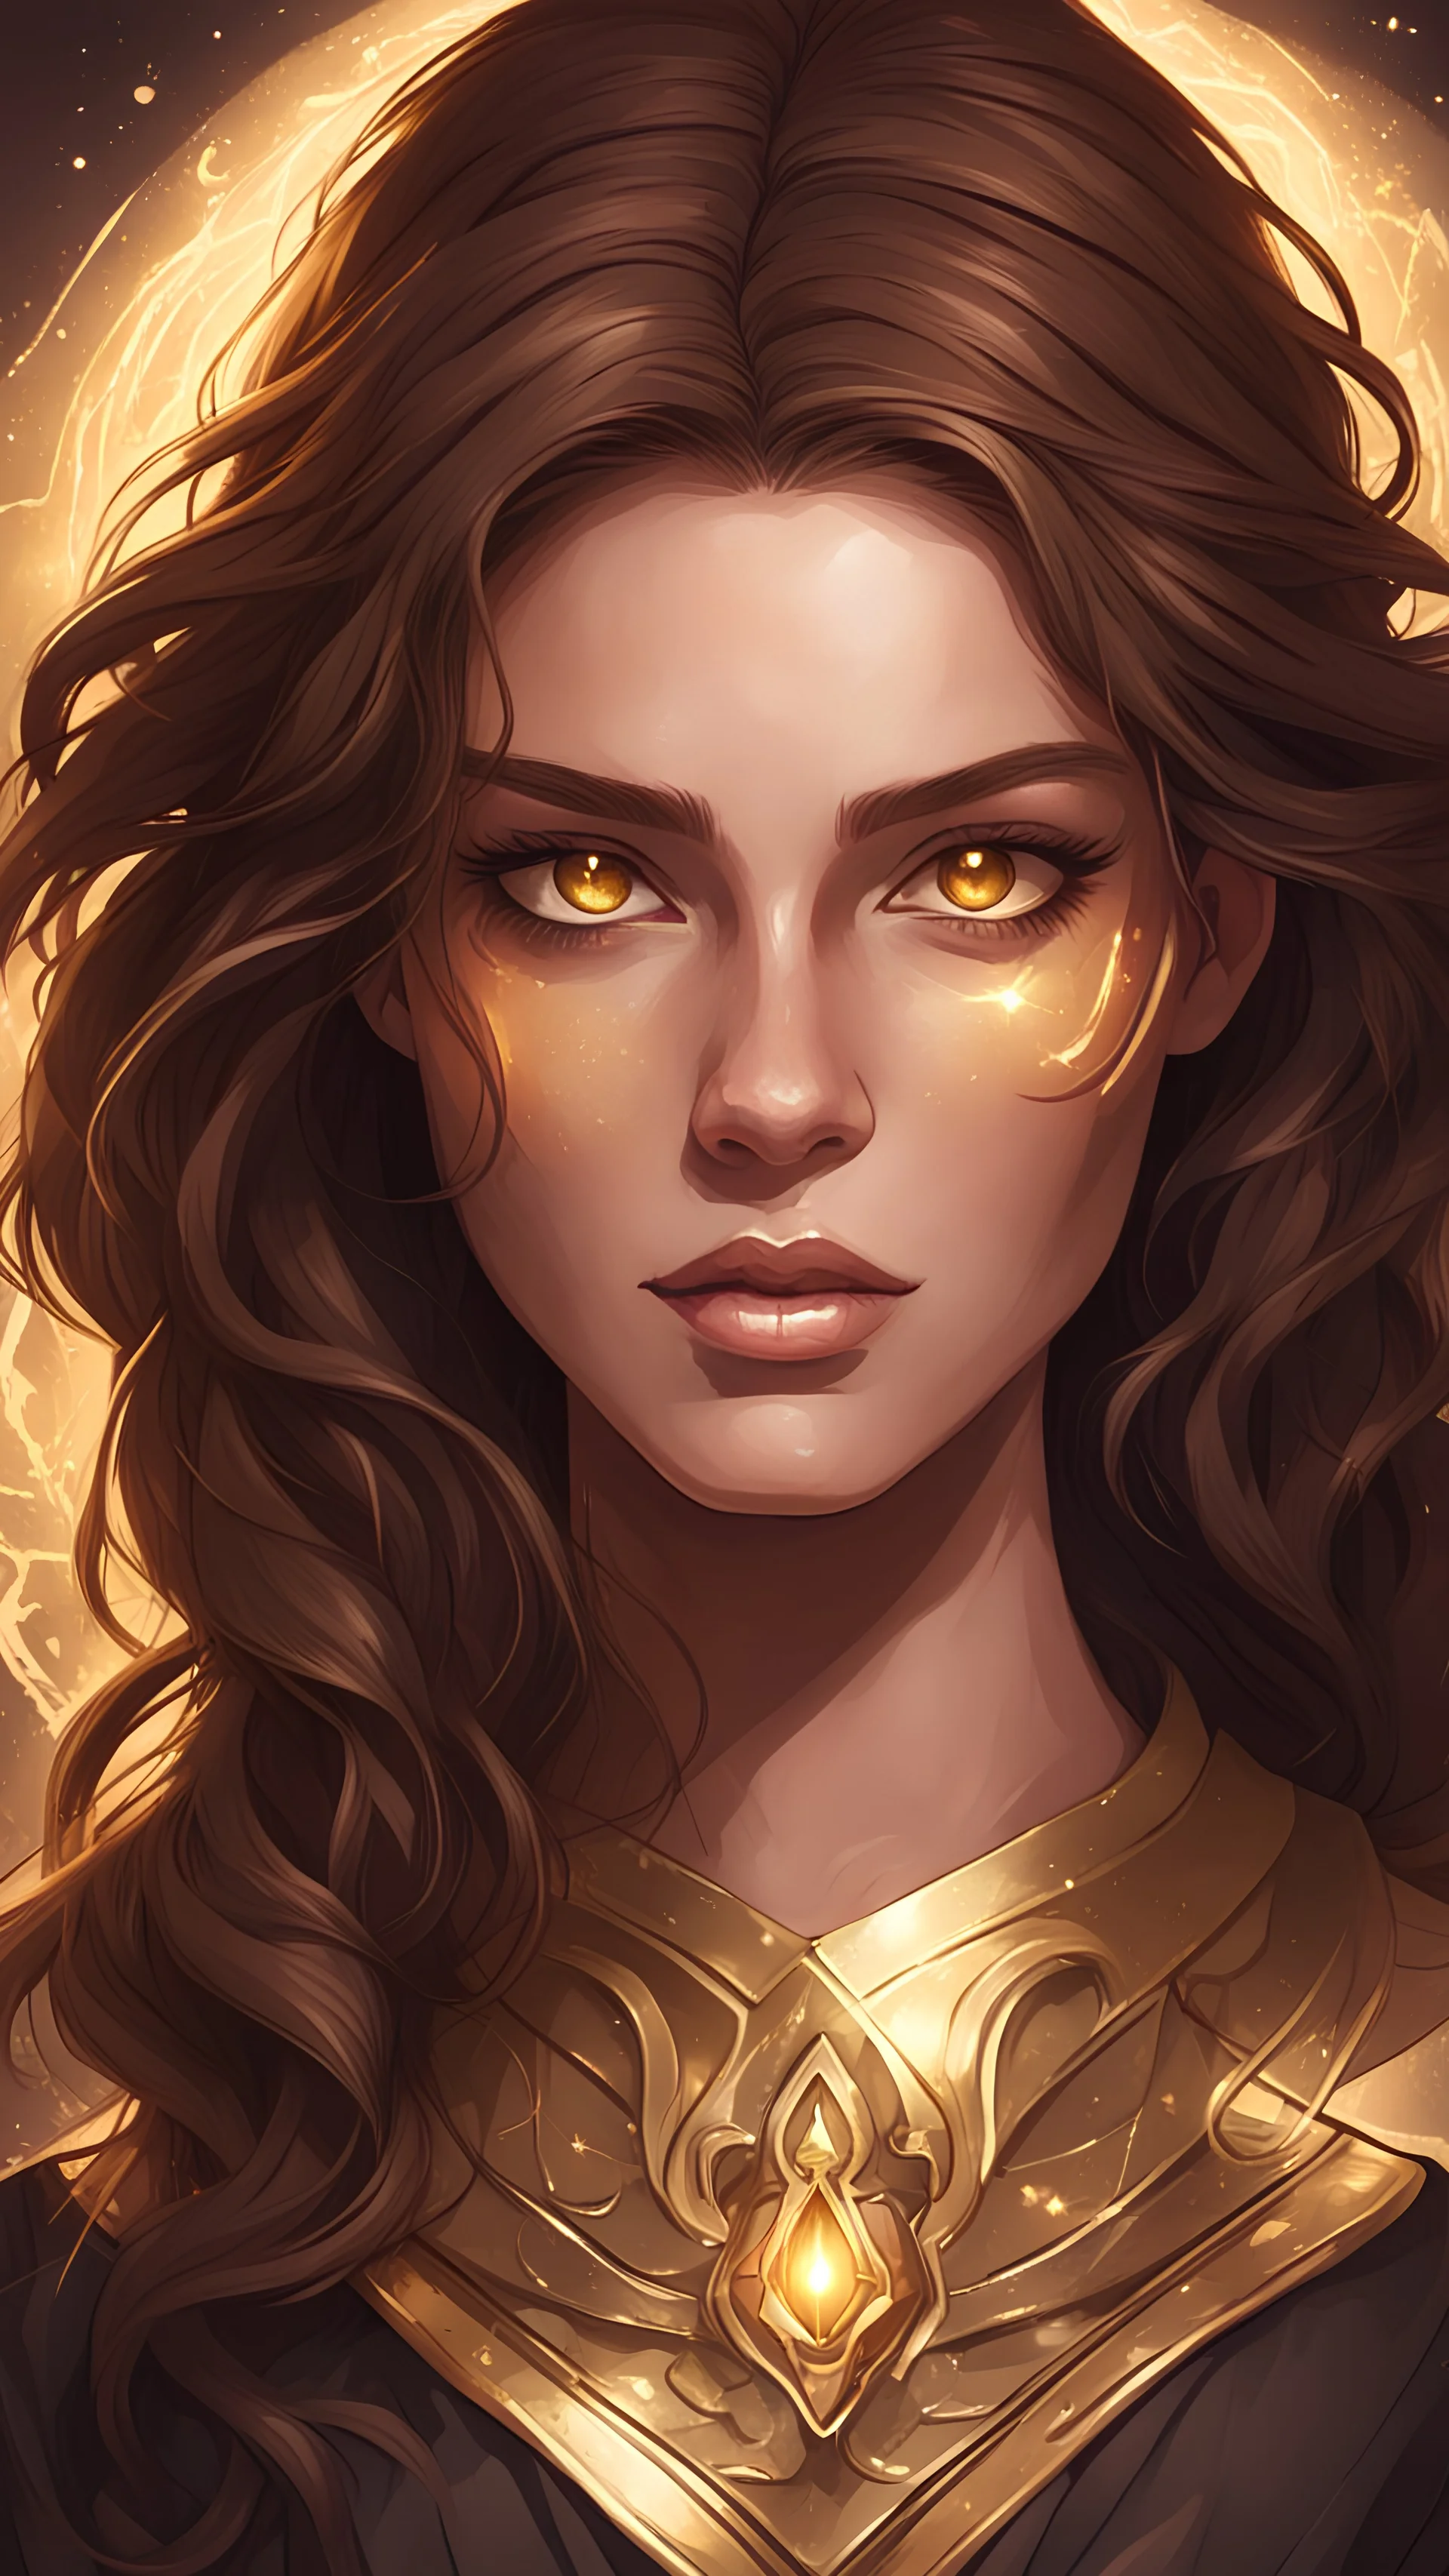 Young woman in arcane art style. Brown hair and gold eyes, Light brown skin